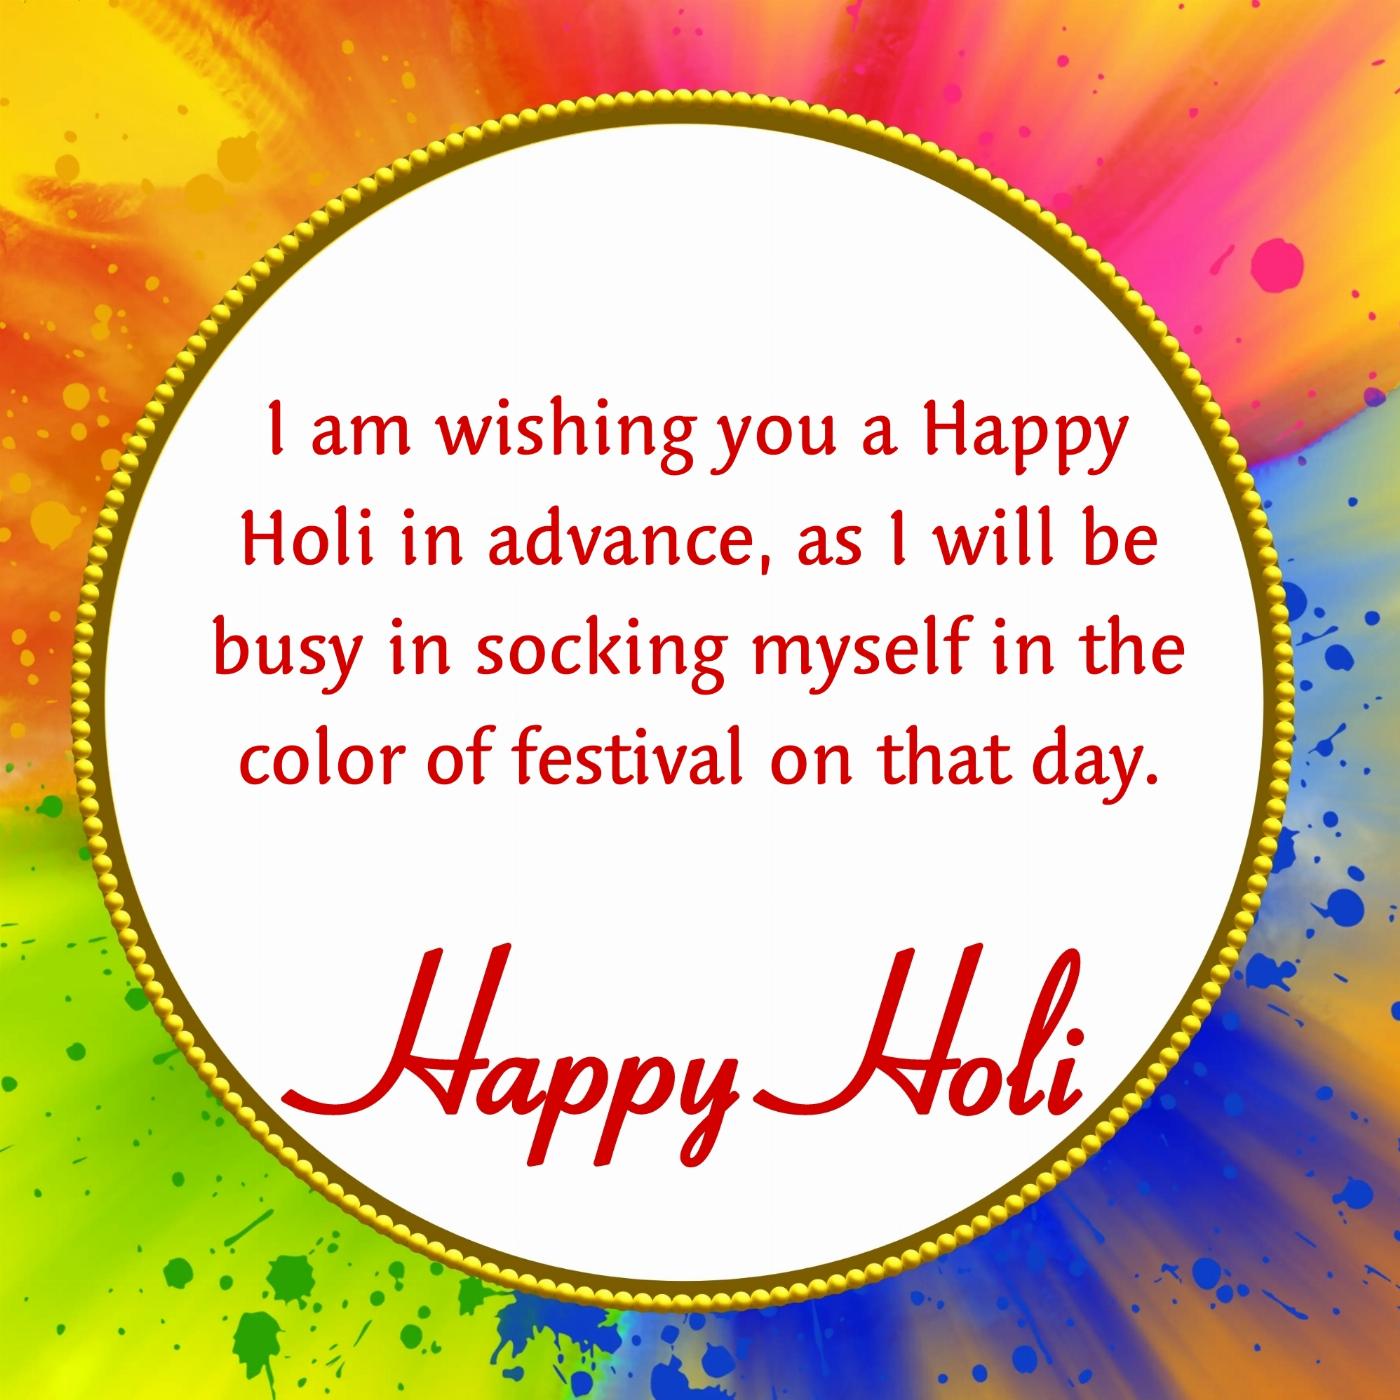 I am wishing you a Happy Holi in advance as I will be busy